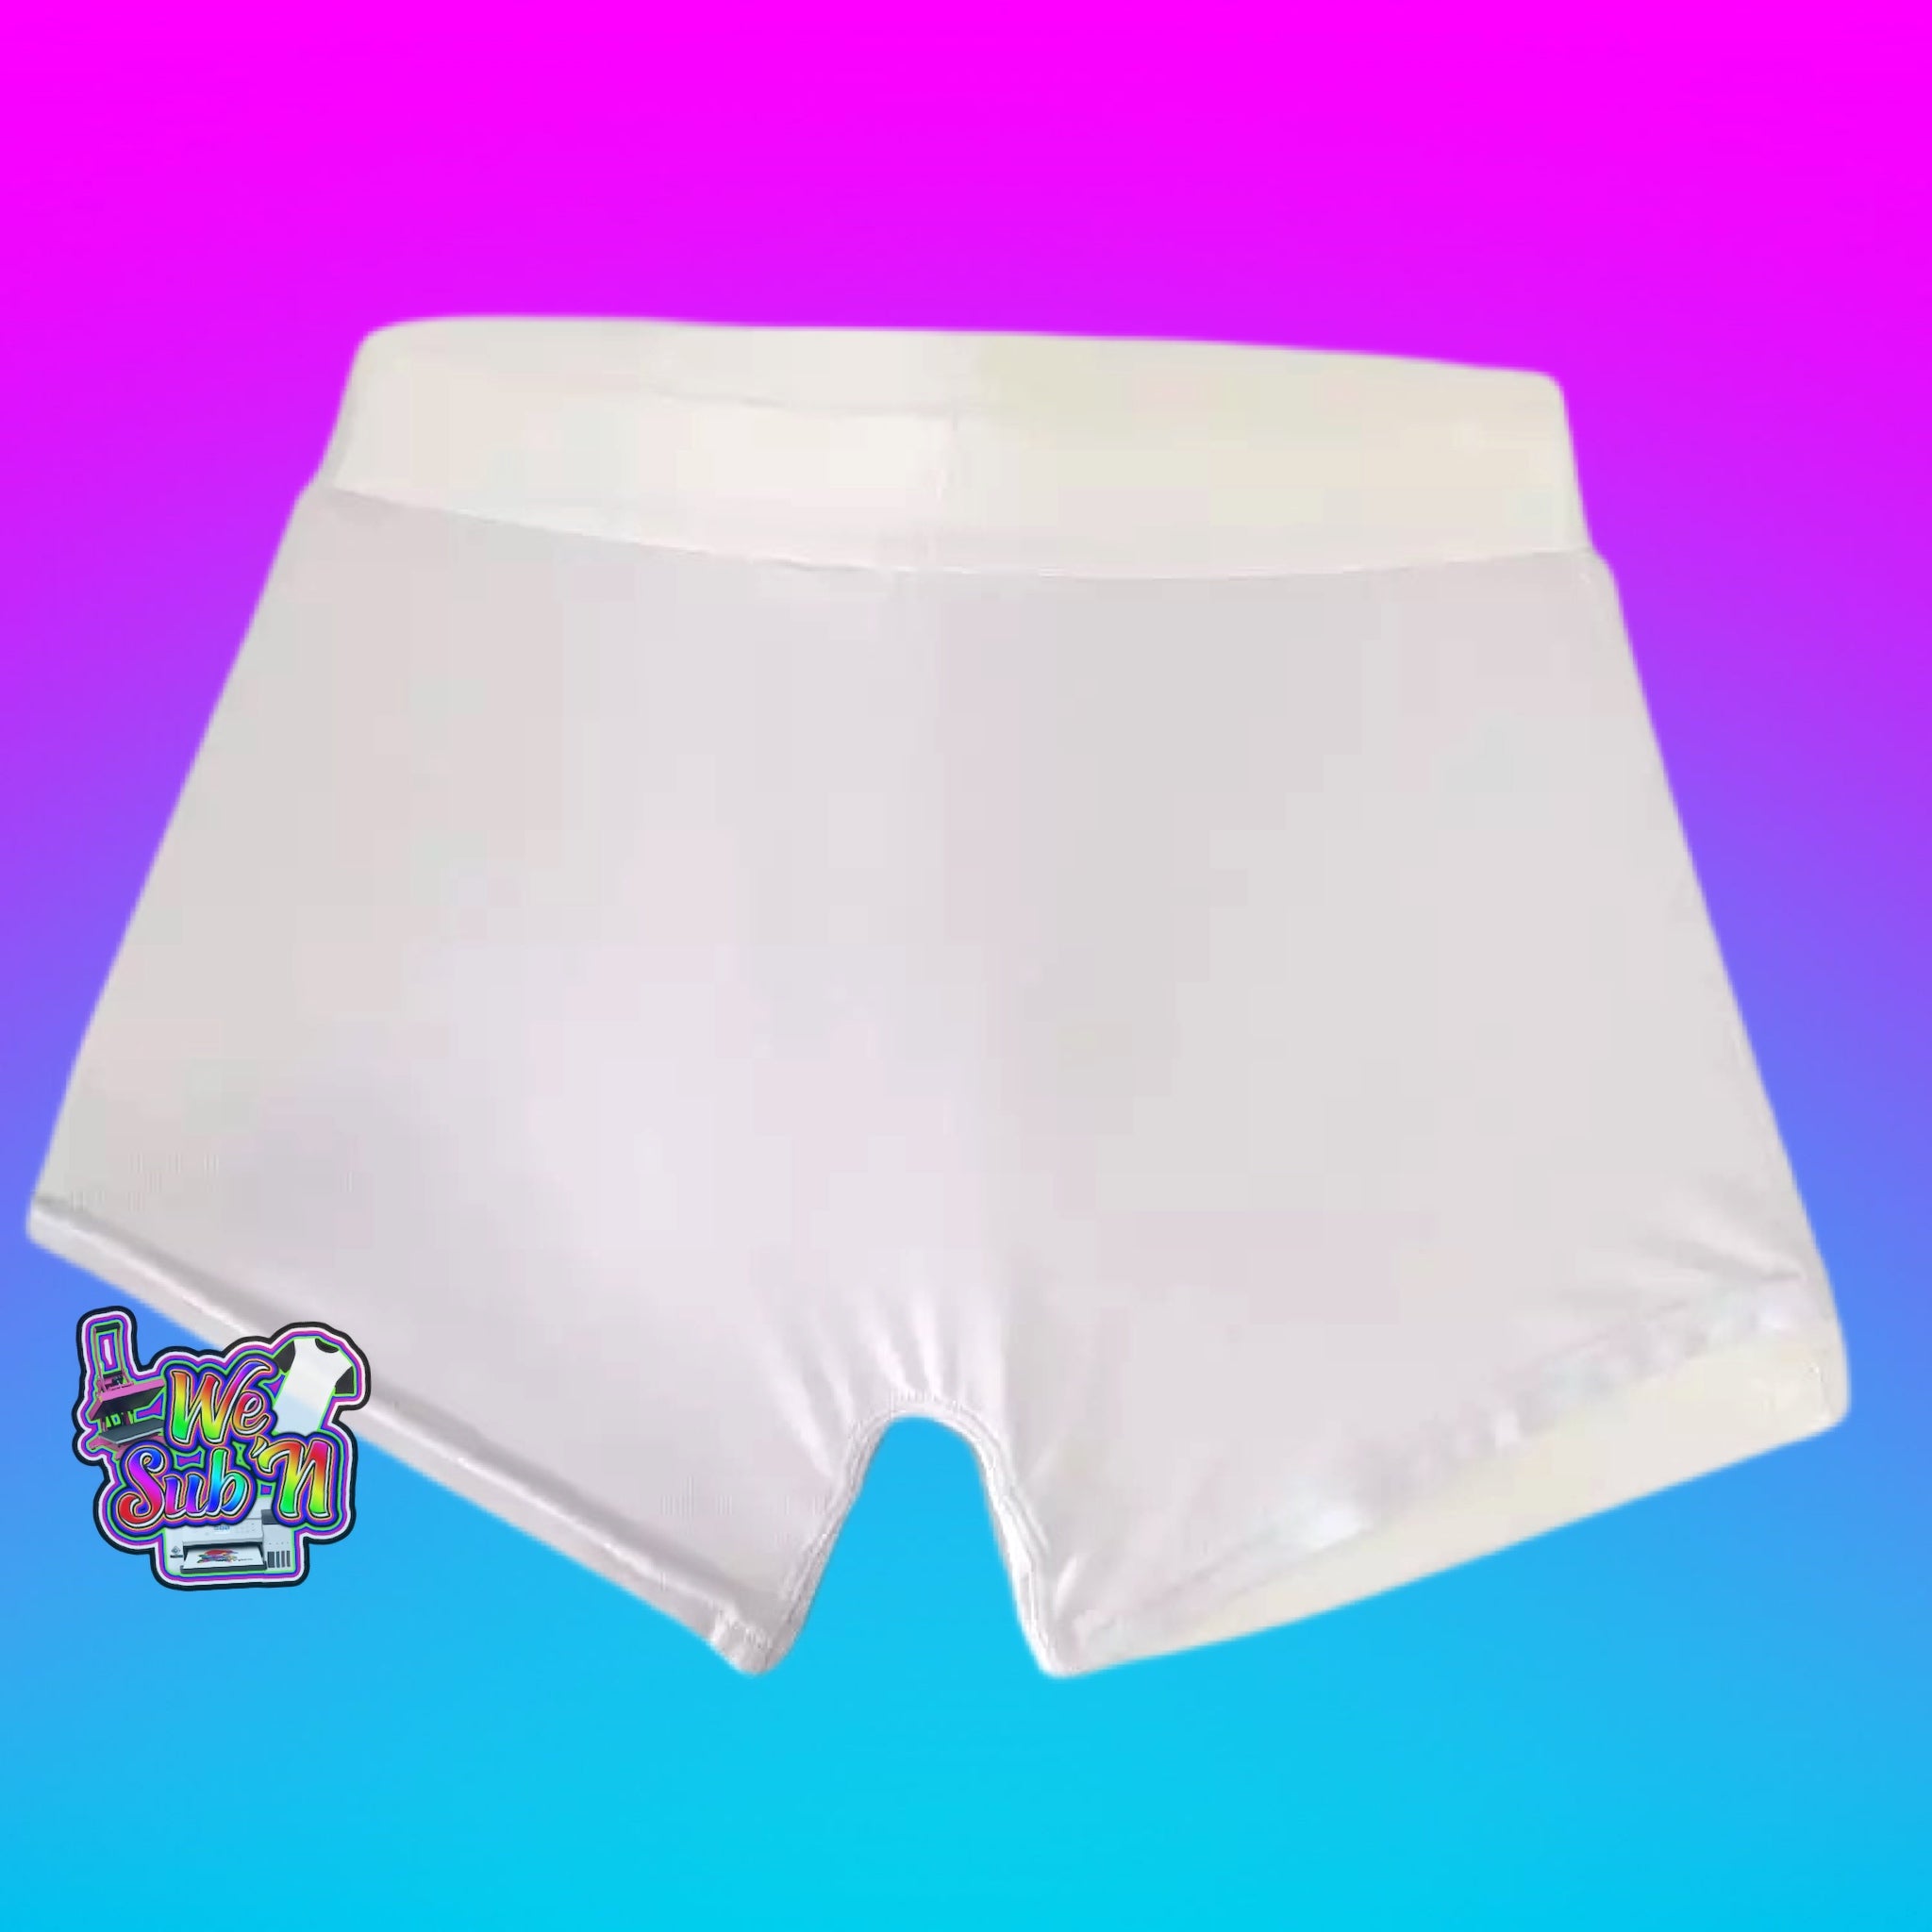 Wholesale Sublimation Mens Boxer Briefs Heat Transfer White Blank  Underpants Polyester Underwear American Size M L XL XXL Home Clothing A12  From Hc_network004, $2.69